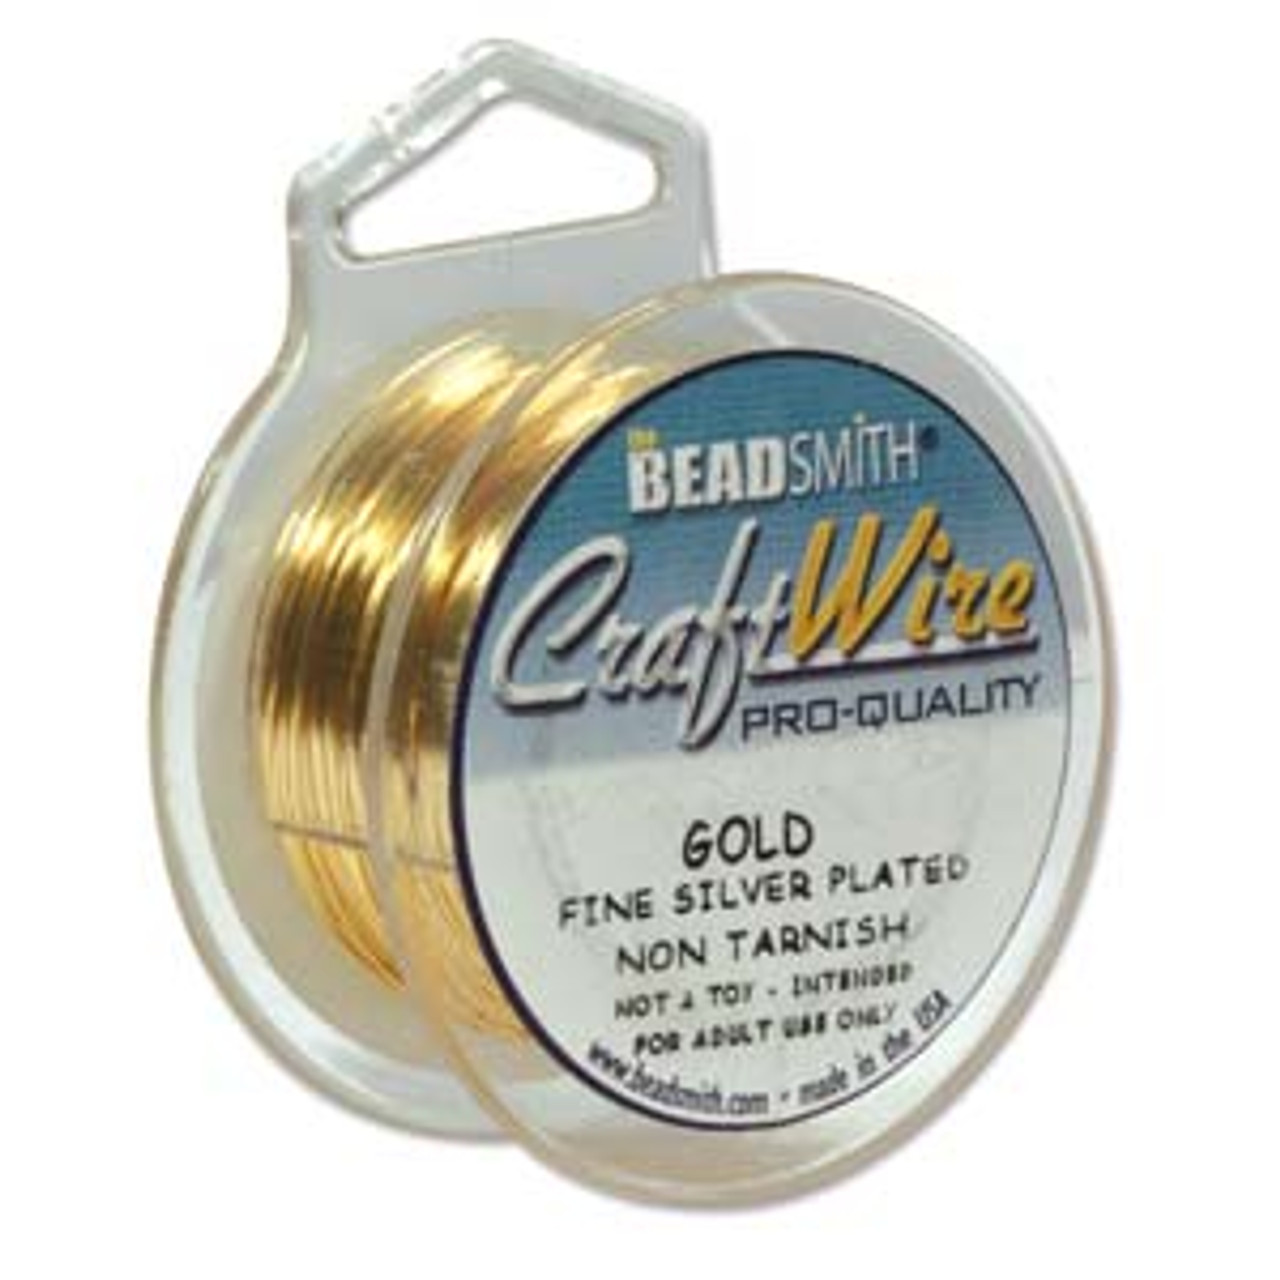 BeadSmith Craft Wire 22 Gauge GOLD PLATED